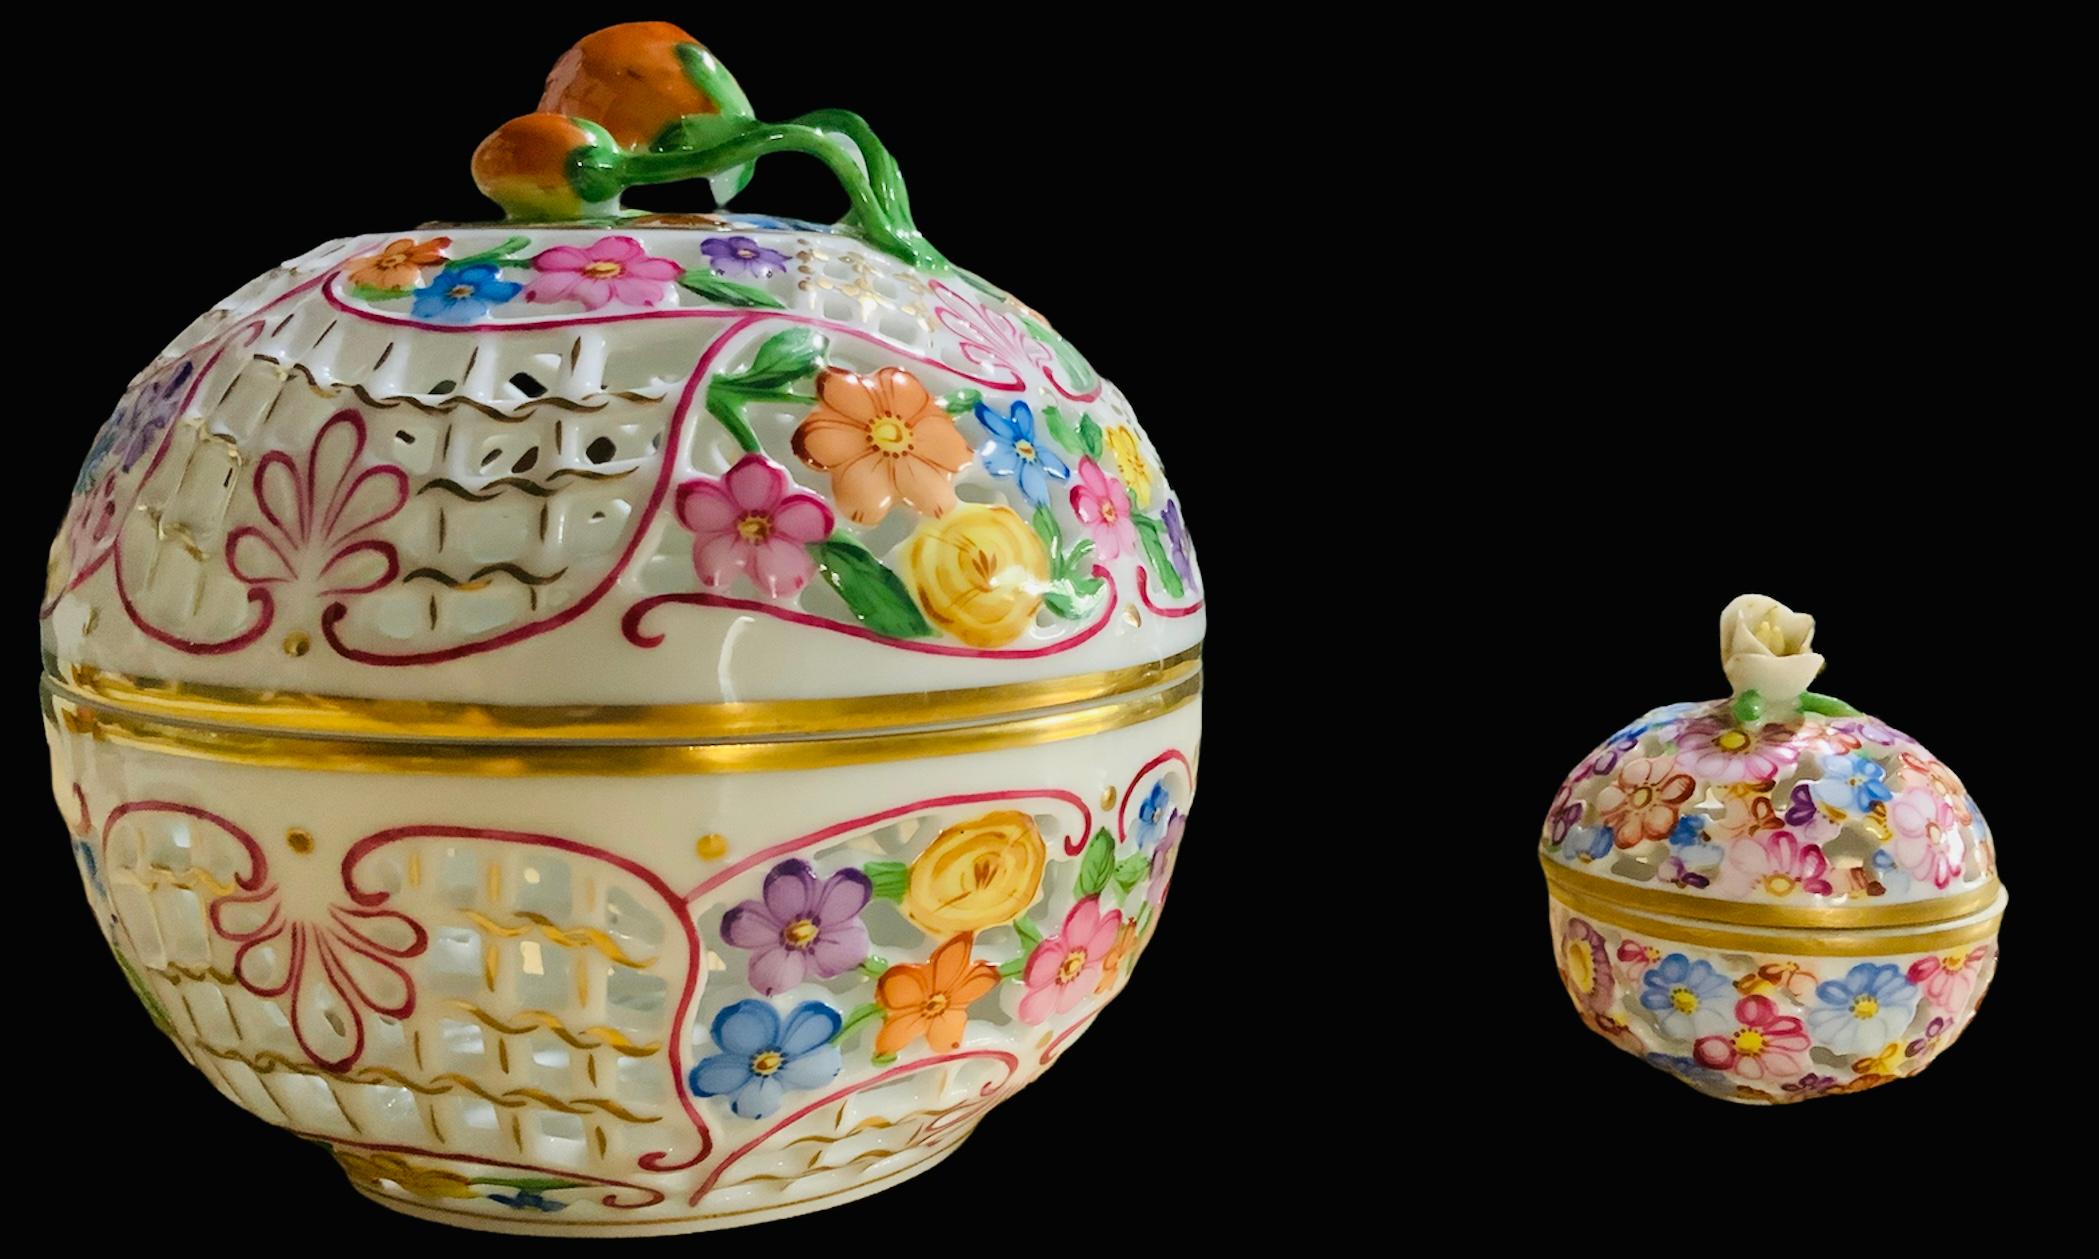 20th Century Herend Porcelain Reticulated Potpourri / Bombonniere Lidded Box For Sale